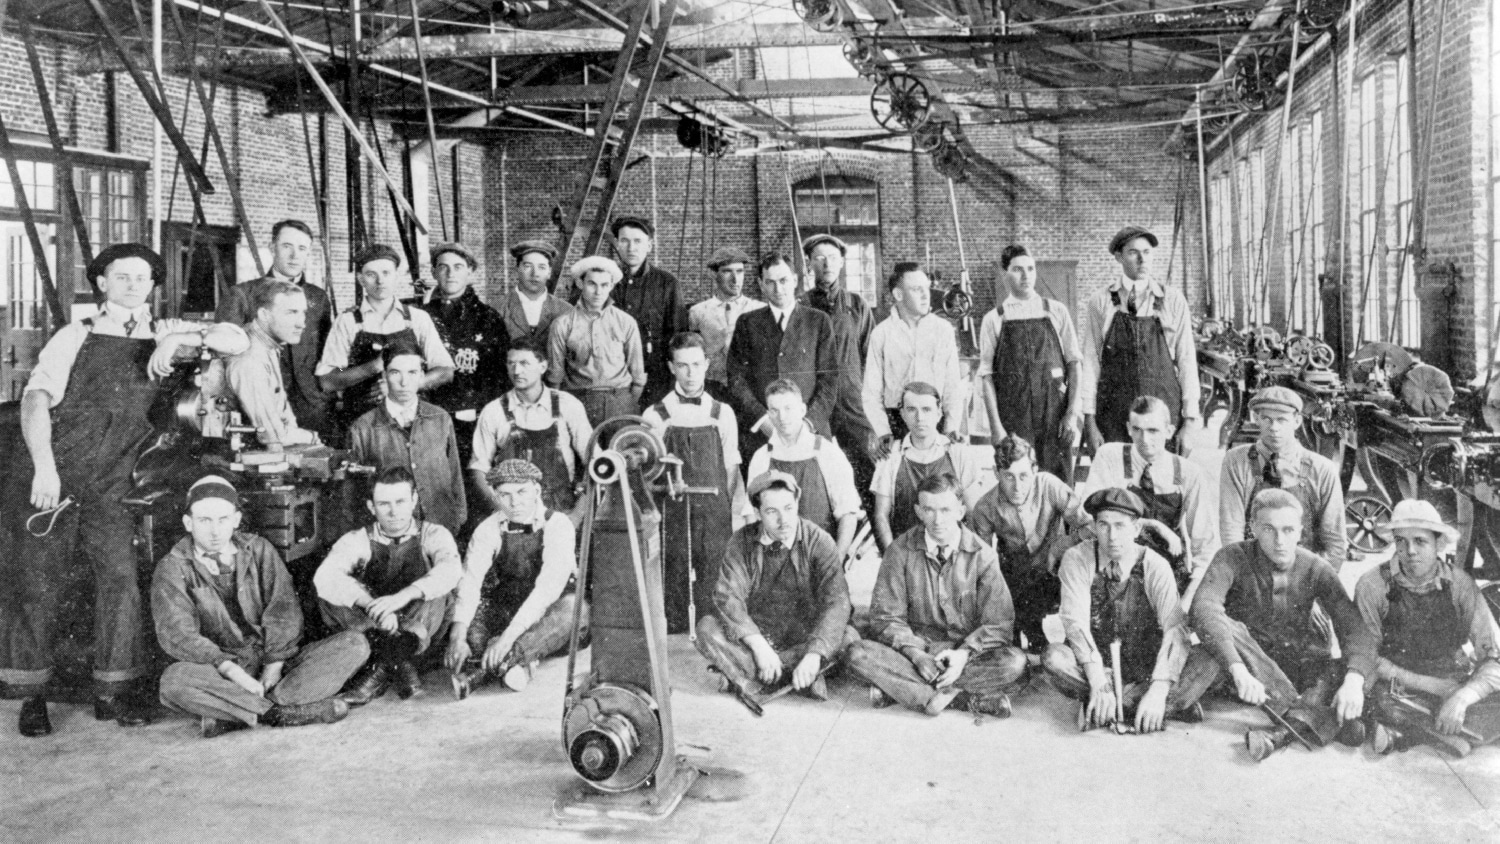 A black and white photo of a group of men posing with farming equipment. The bottom of the photo reads "Freshman Class 1909."